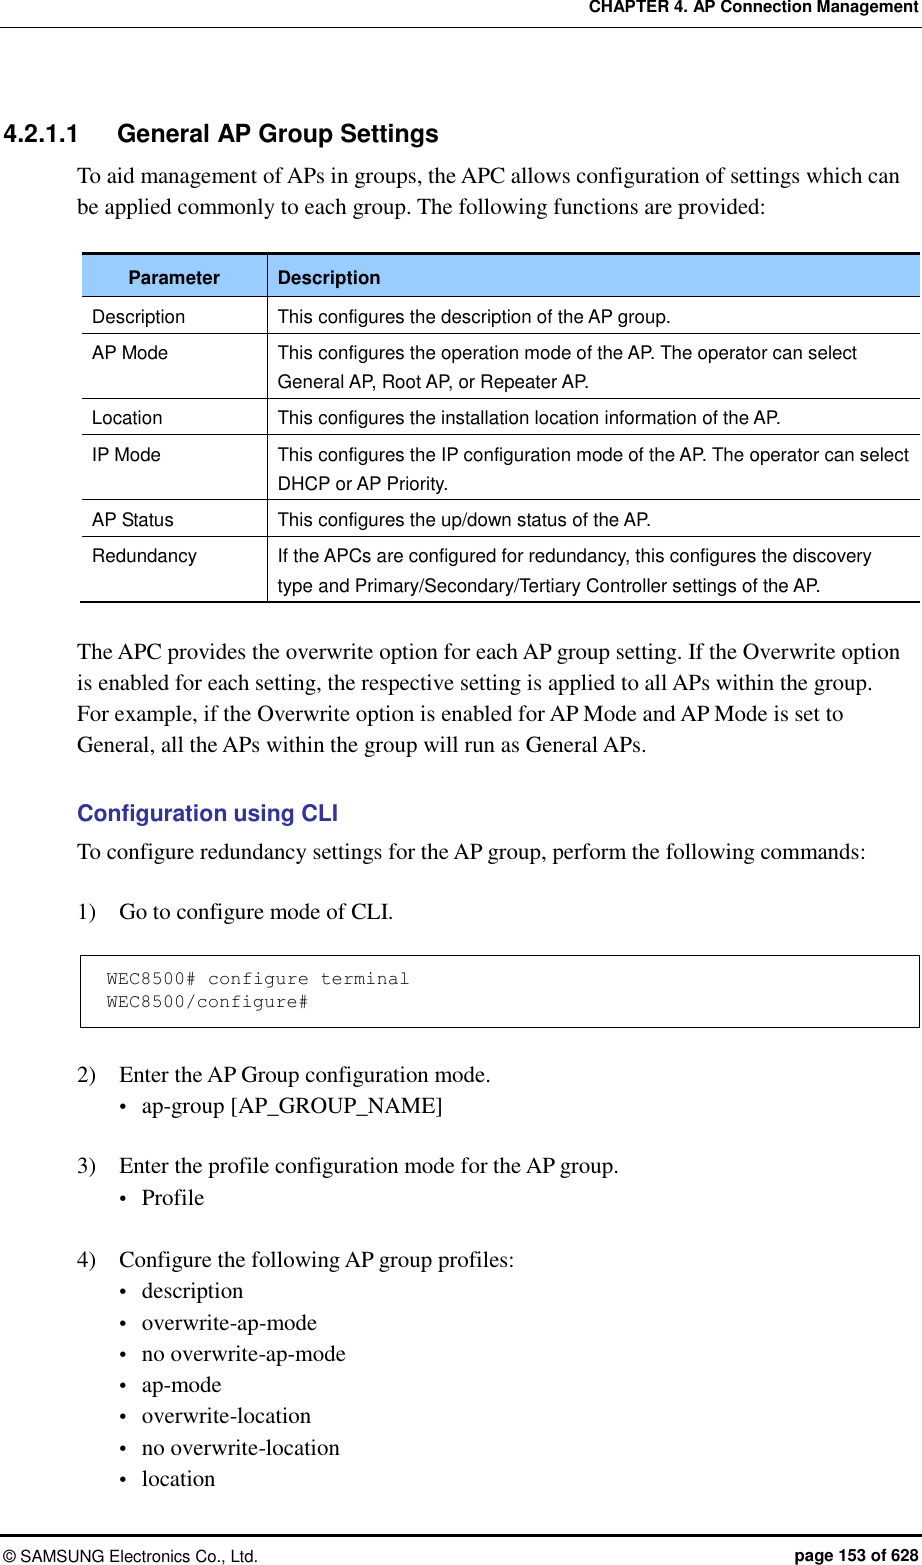 CHAPTER 4. AP Connection Management ©  SAMSUNG Electronics Co., Ltd.  page 153 of 628 4.2.1.1  General AP Group Settings To aid management of APs in groups, the APC allows configuration of settings which can be applied commonly to each group. The following functions are provided:  Parameter Description Description   This configures the description of the AP group. AP Mode This configures the operation mode of the AP. The operator can select General AP, Root AP, or Repeater AP. Location This configures the installation location information of the AP. IP Mode This configures the IP configuration mode of the AP. The operator can select DHCP or AP Priority. AP Status This configures the up/down status of the AP. Redundancy If the APCs are configured for redundancy, this configures the discovery type and Primary/Secondary/Tertiary Controller settings of the AP.  The APC provides the overwrite option for each AP group setting. If the Overwrite option is enabled for each setting, the respective setting is applied to all APs within the group.   For example, if the Overwrite option is enabled for AP Mode and AP Mode is set to General, all the APs within the group will run as General APs.  Configuration using CLI To configure redundancy settings for the AP group, perform the following commands:  1)    Go to configure mode of CLI.  WEC8500# configure terminal WEC8500/configure#  2)    Enter the AP Group configuration mode.  ap-group [AP_GROUP_NAME]  3)    Enter the profile configuration mode for the AP group.  Profile  4)    Configure the following AP group profiles:  description  overwrite-ap-mode  no overwrite-ap-mode  ap-mode  overwrite-location  no overwrite-location  location 